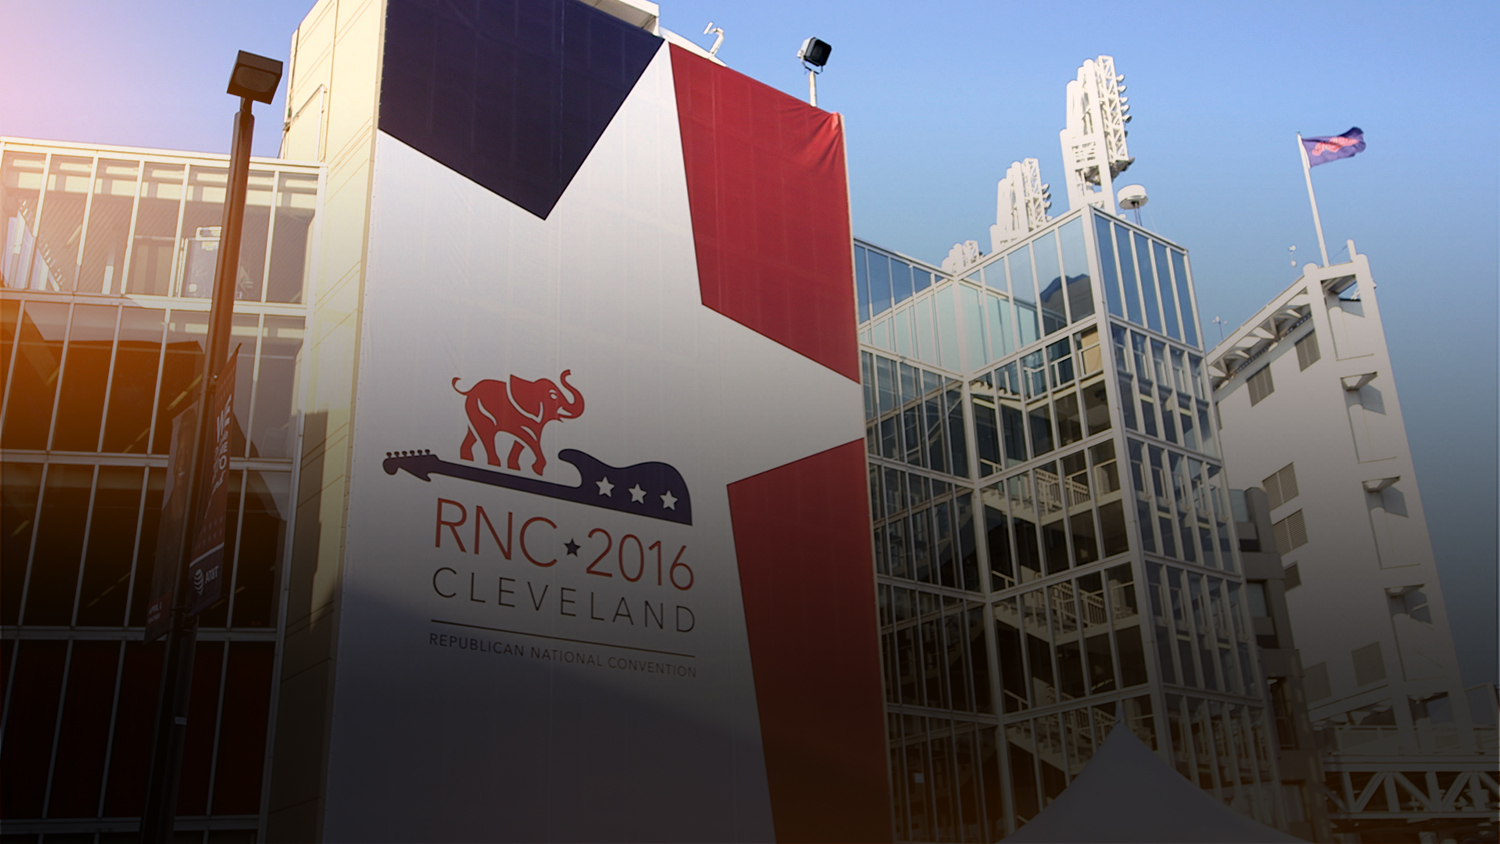 Big Banner on the side of a building reads. RNC * 2016 Cleveland